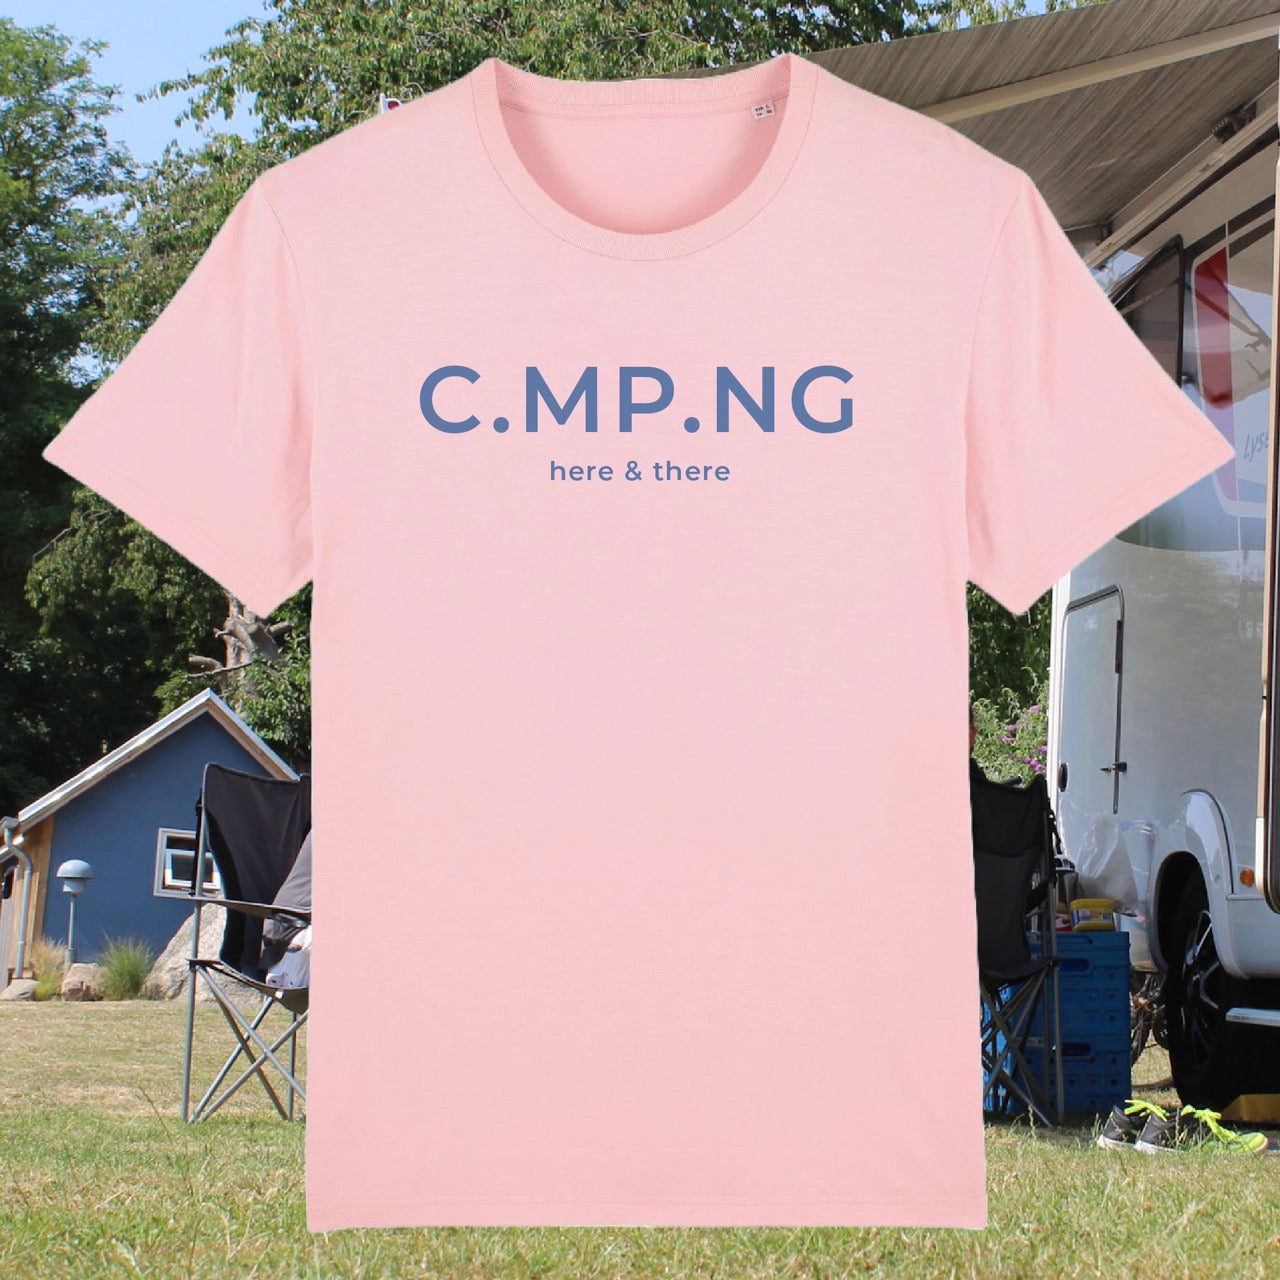 Camping T-Shirt in rosa mit blauem C.MP.NG here and there Aufdruck  Alt-Text bearbeiten